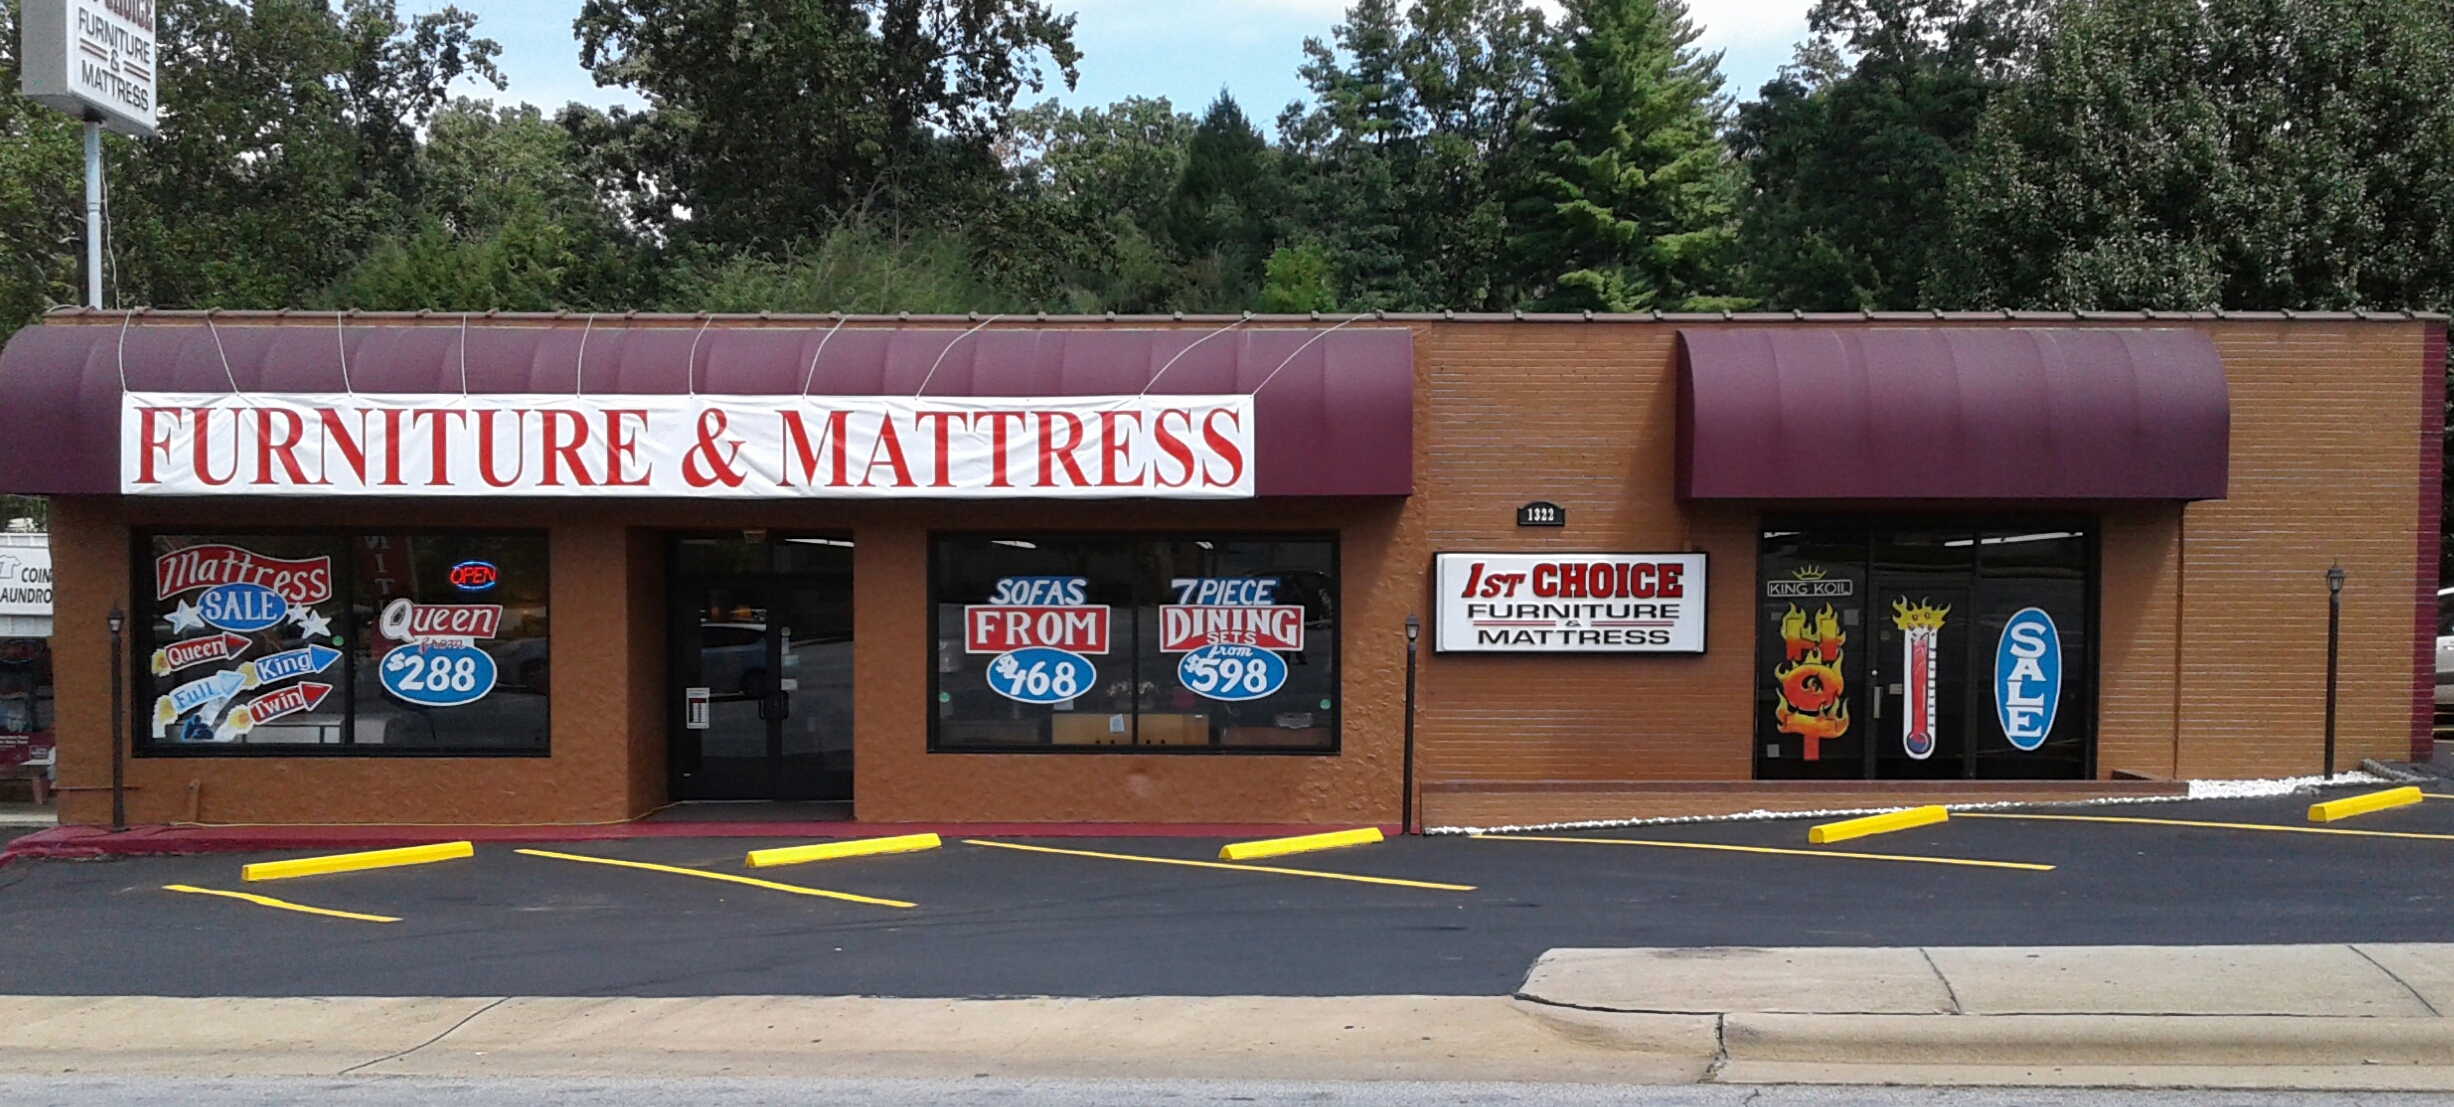 connolly's furniture and mattress